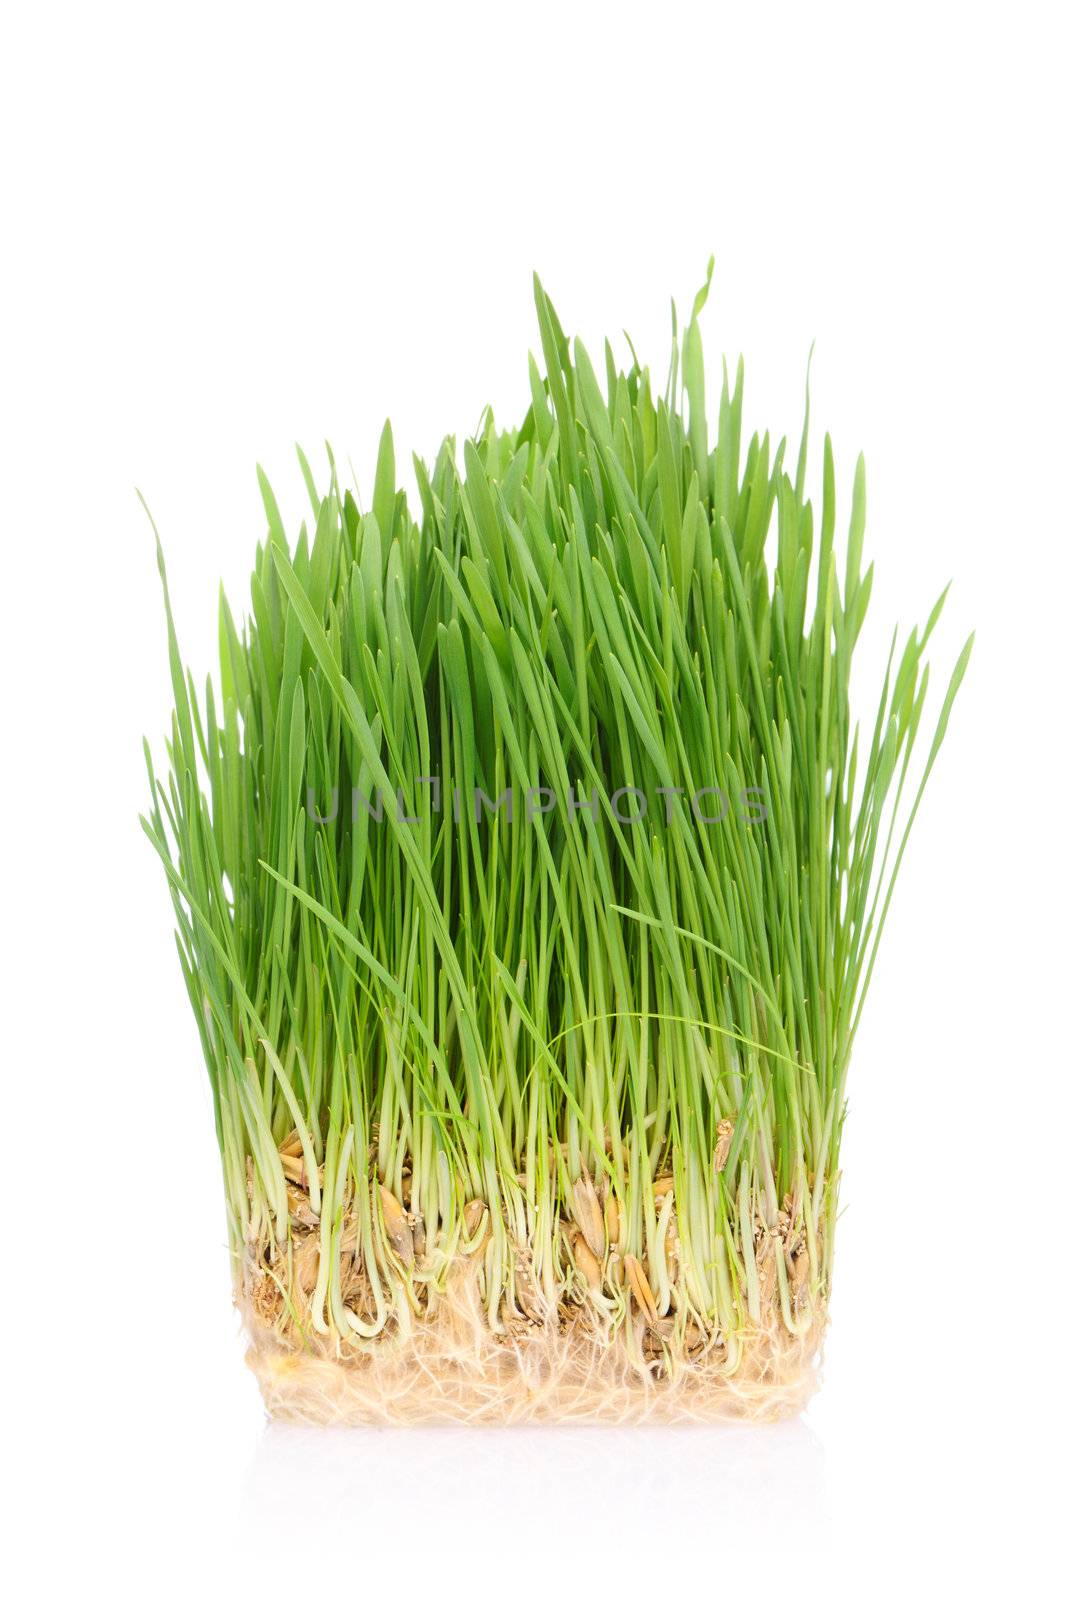 Green grass in soil isolated on white background